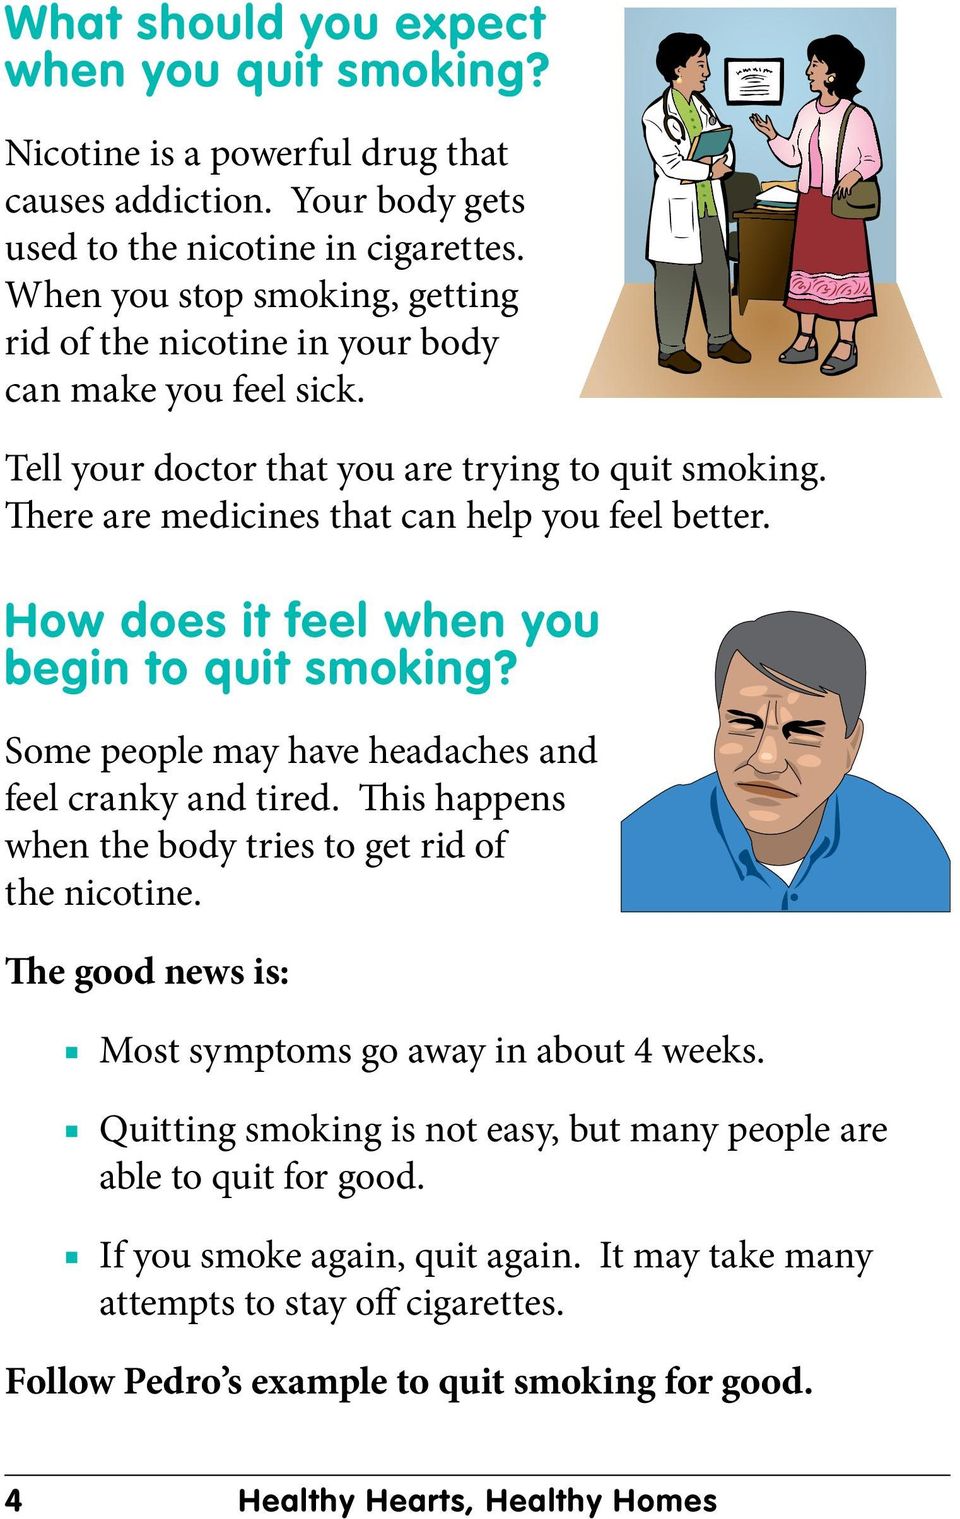 How does it feel when you begin to quit smoking? Some people may have headaches and feel cranky and tired. This happens when the body tries to get rid of the nicotine.